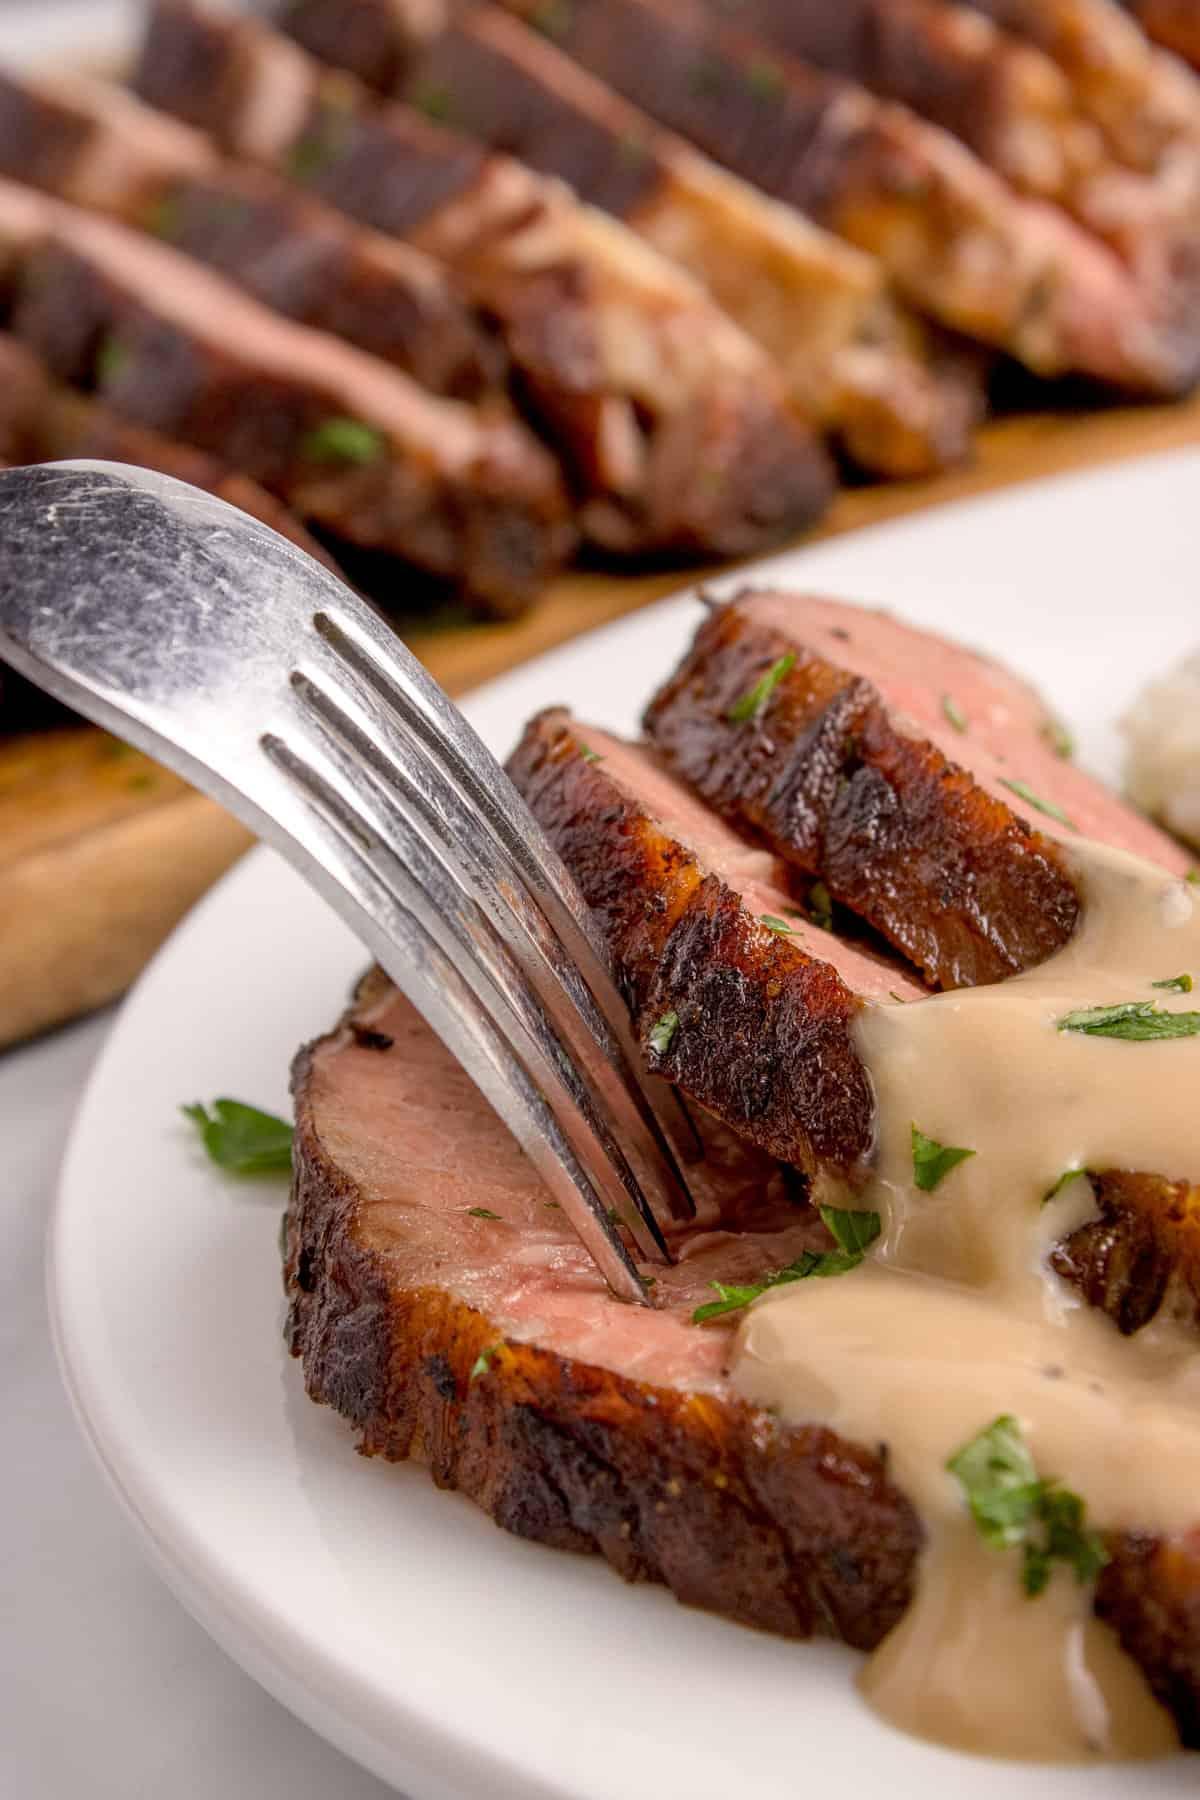 A plate of beef with gravy.